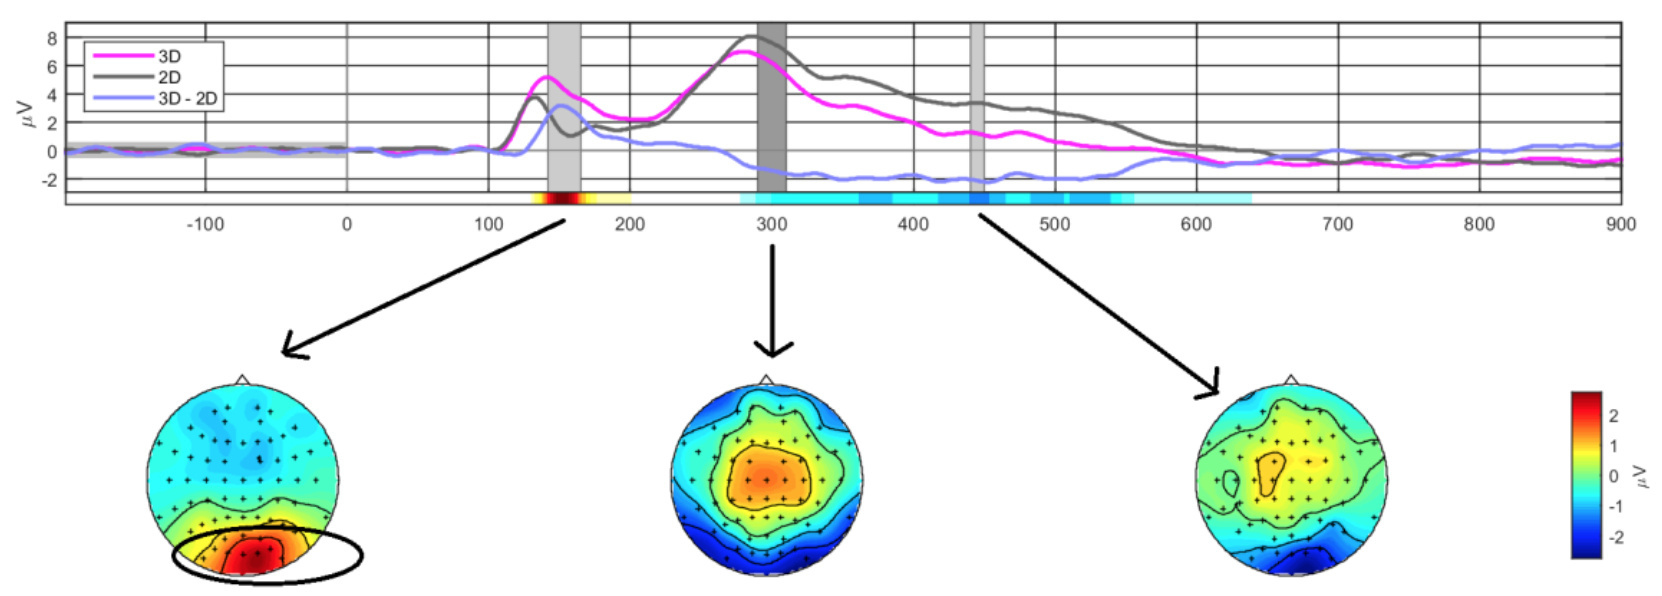 EEG, ECG and Time Series Signals